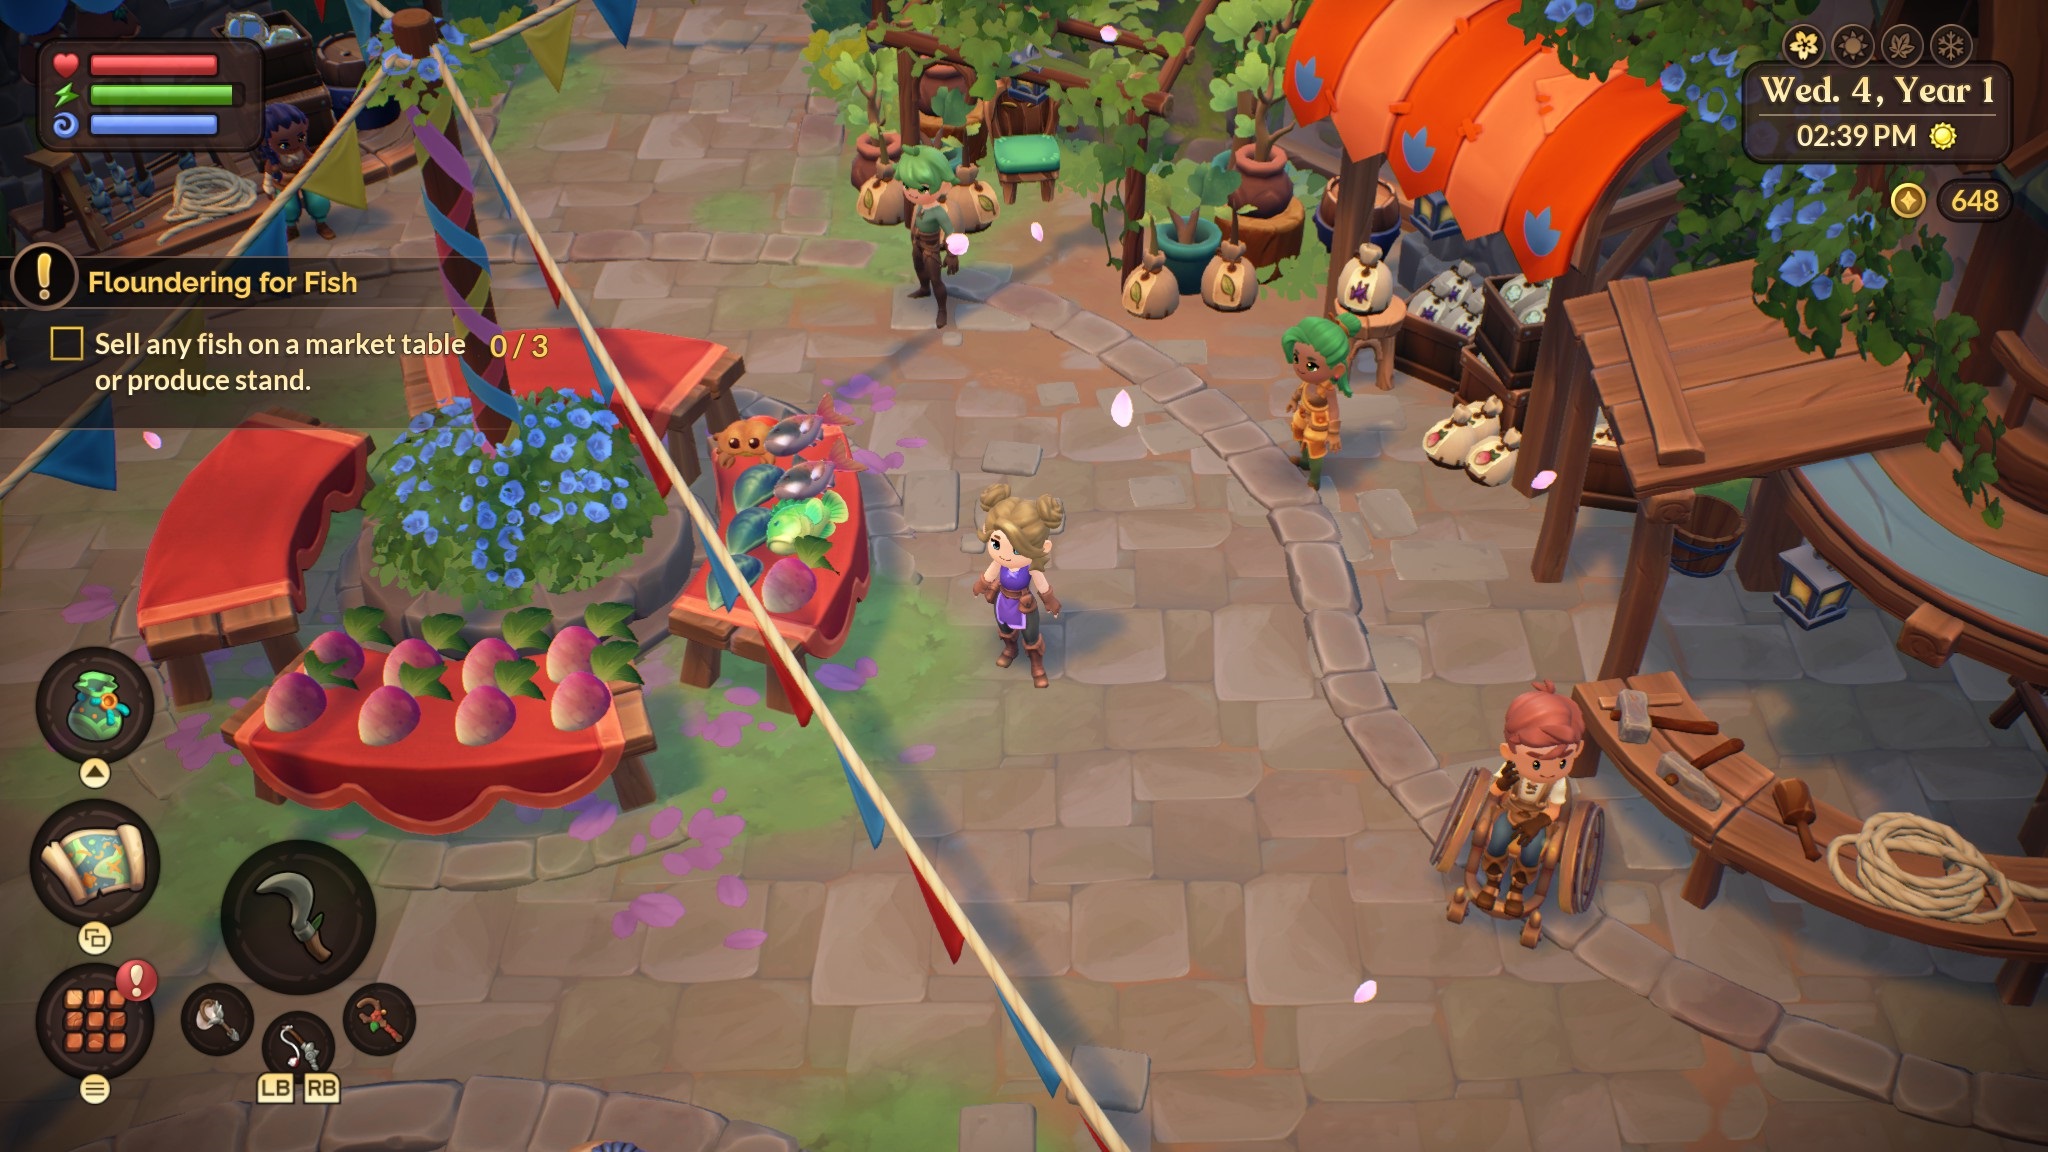 Fae Farm - A player stands in a stone cobbled market next to tables where they've placed their goods